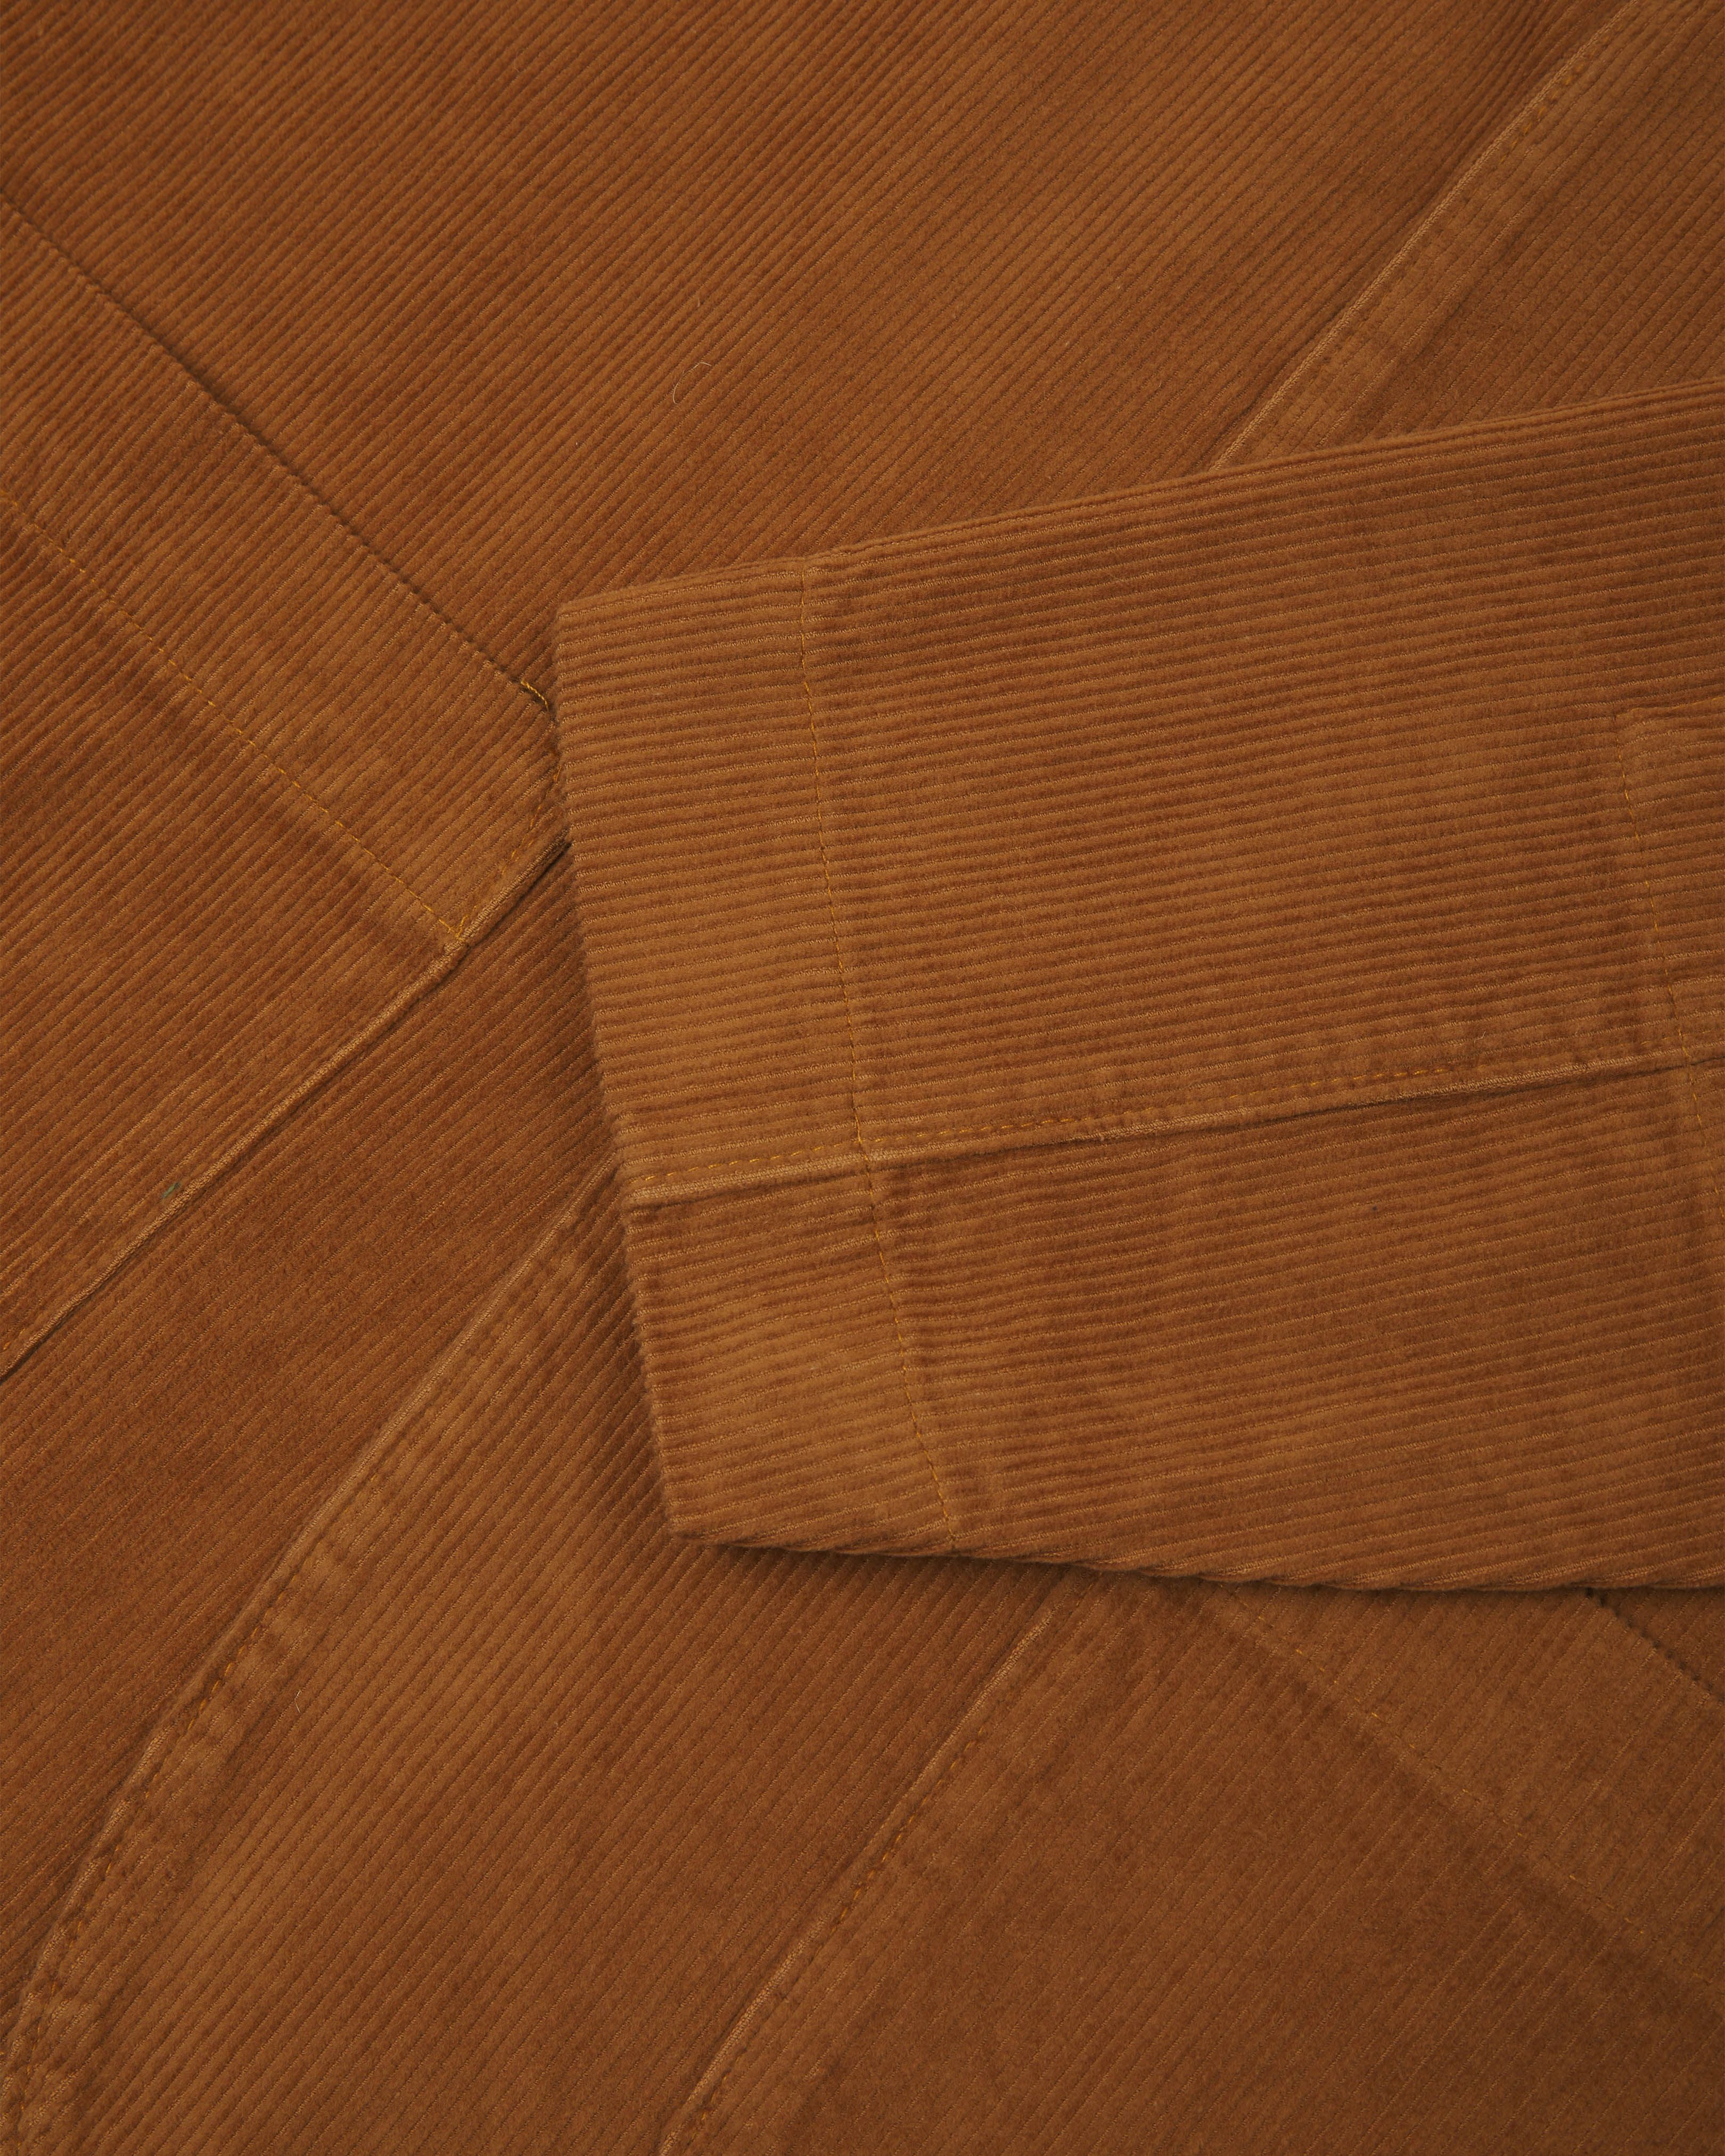 Close-up view of tan corduroy blazer from Uskees showing cuff detail.